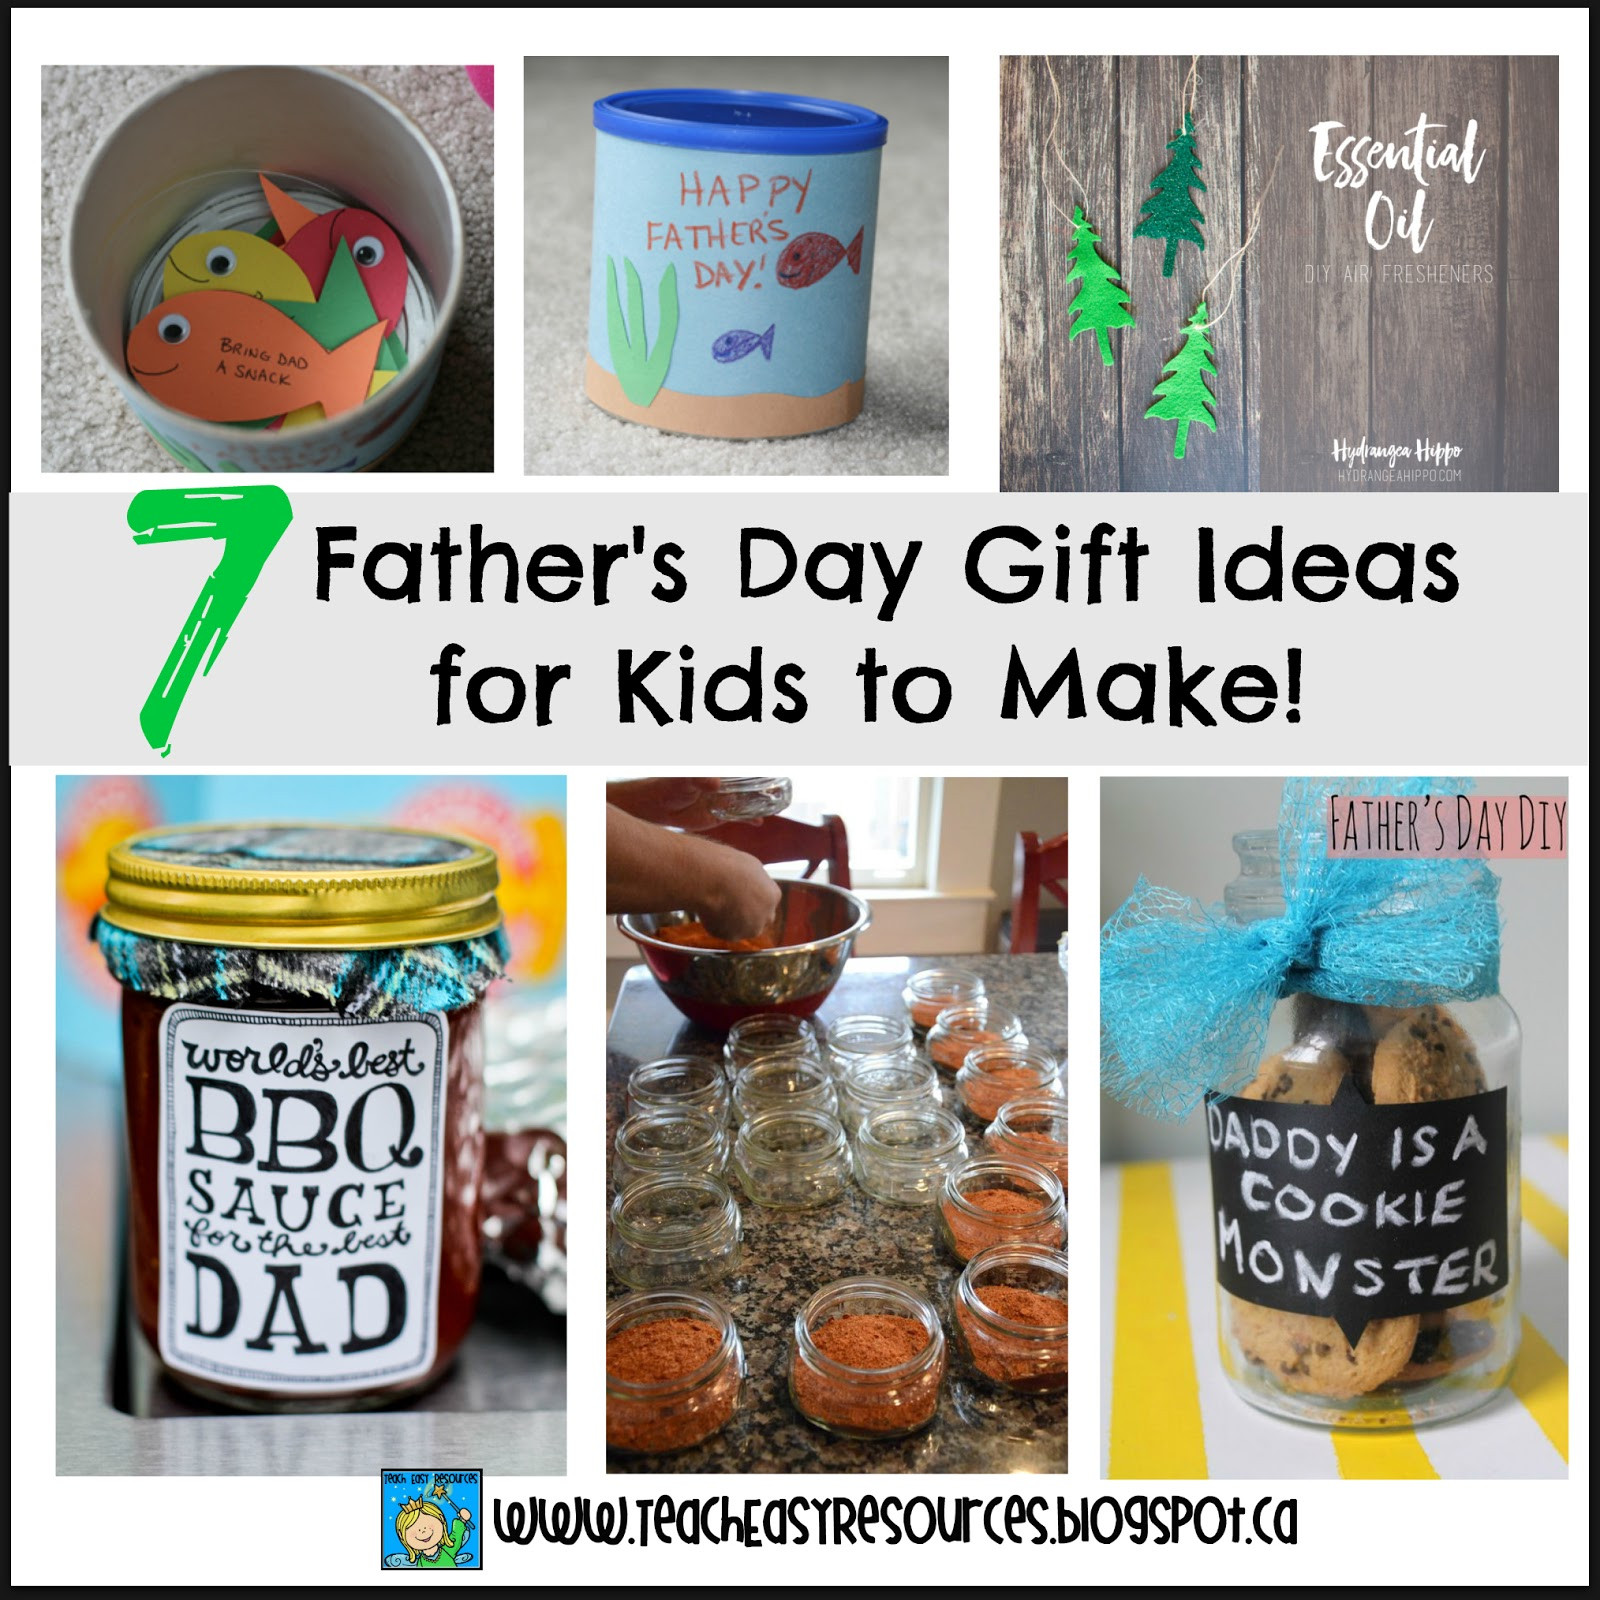 Simple Fathers Day Gift Ideas
 Teach Easy Resources Father s Day Gift Ideas that Kids